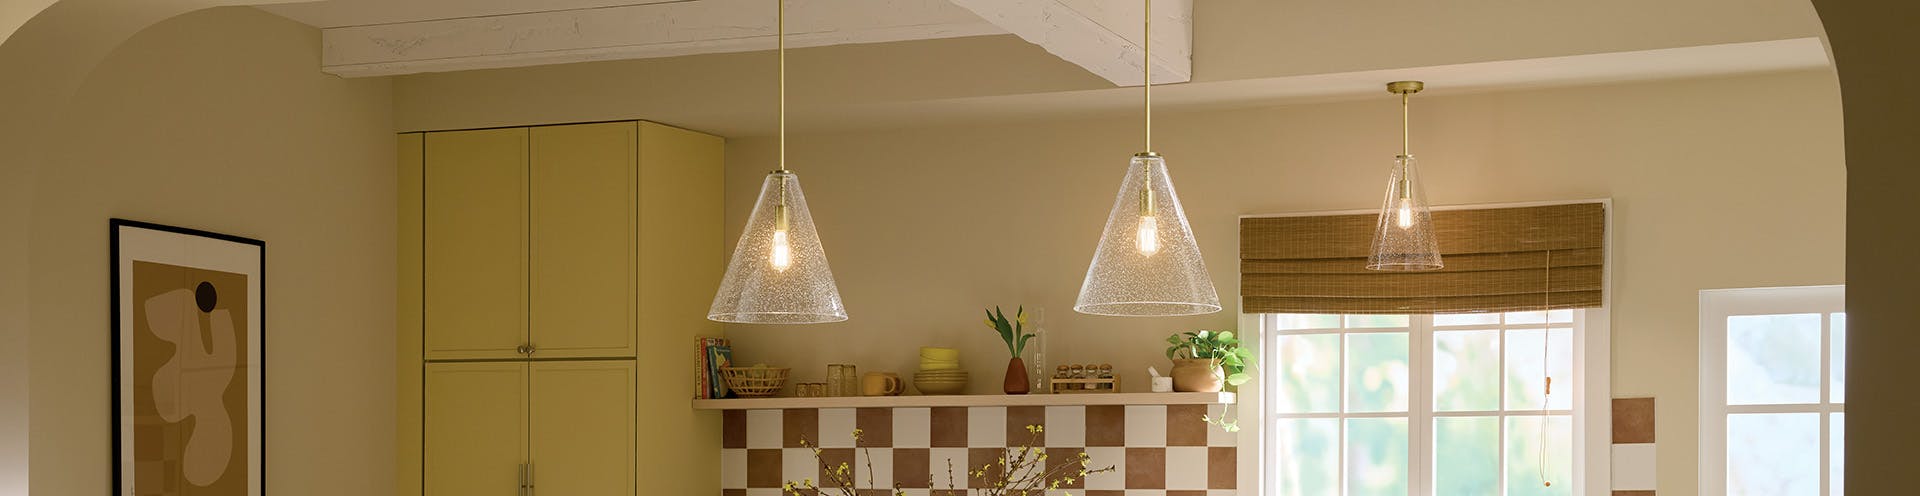 Everly pendants hanging over a kitchen island during the day.